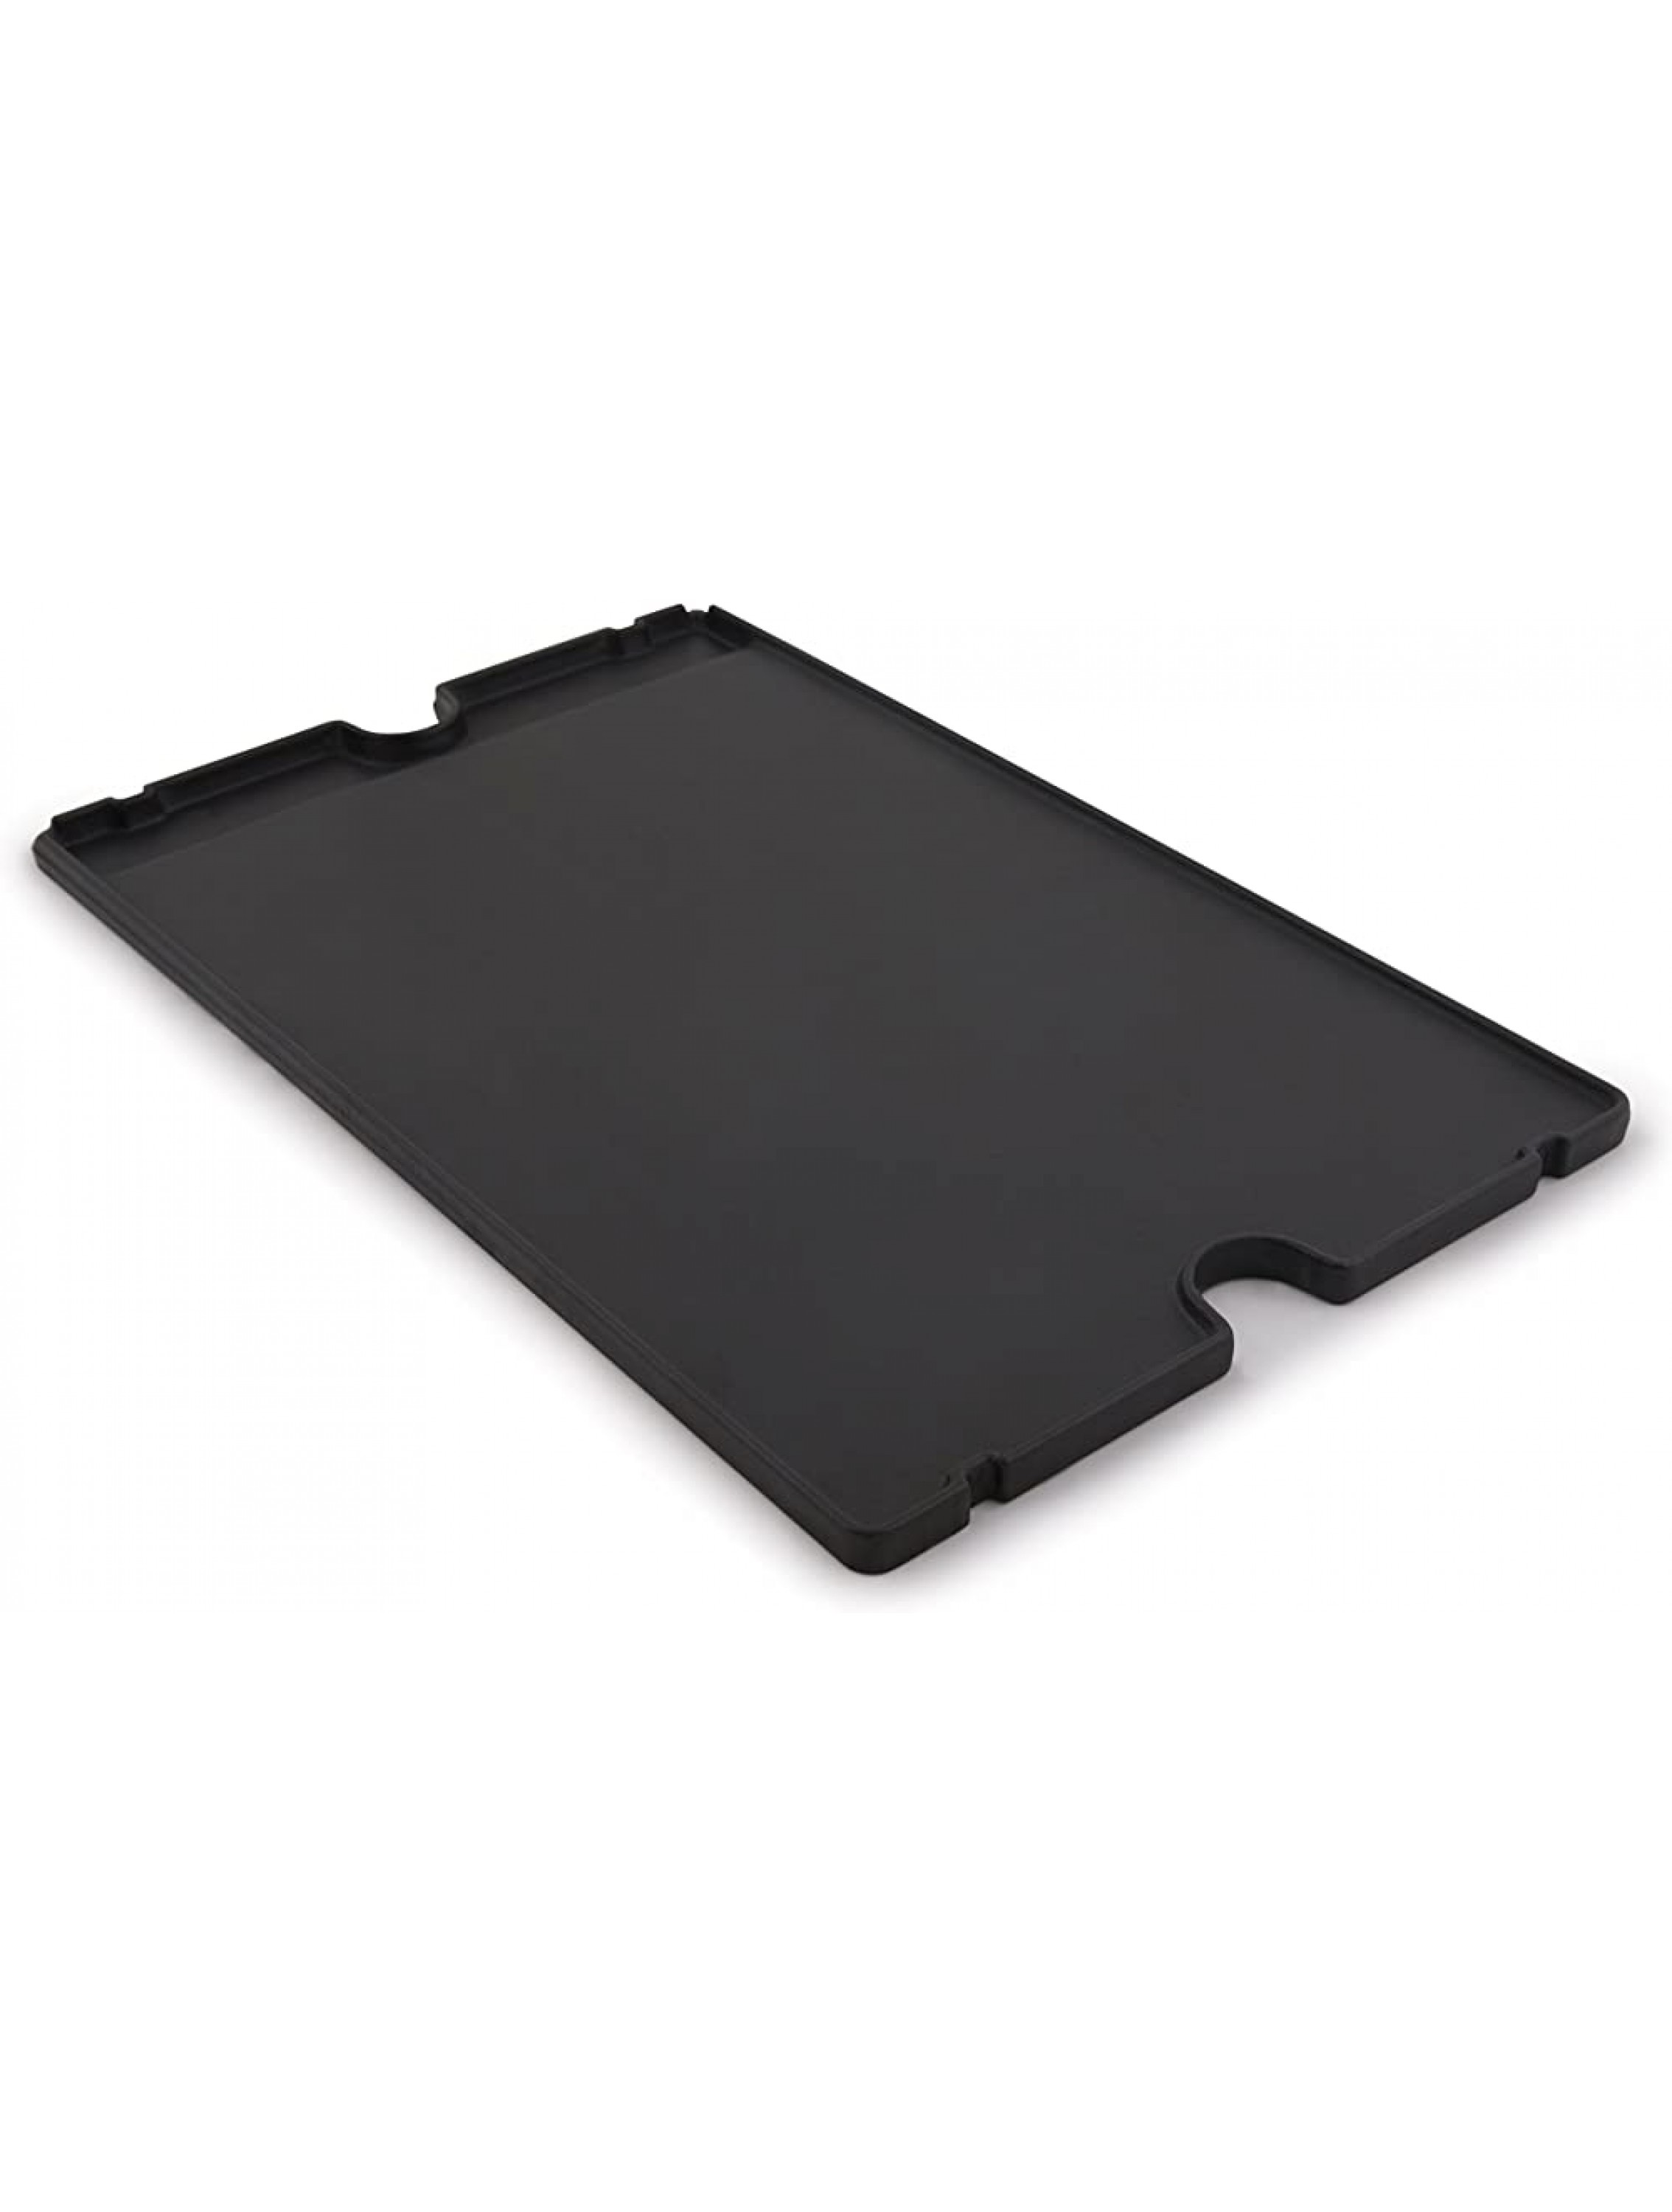 Broil King 11242 Exact Fit Cast Iron Griddle for the Broil King Baron Series Gas Grill 17.48 -IN X 12.48 -IN - BHGANFXXT